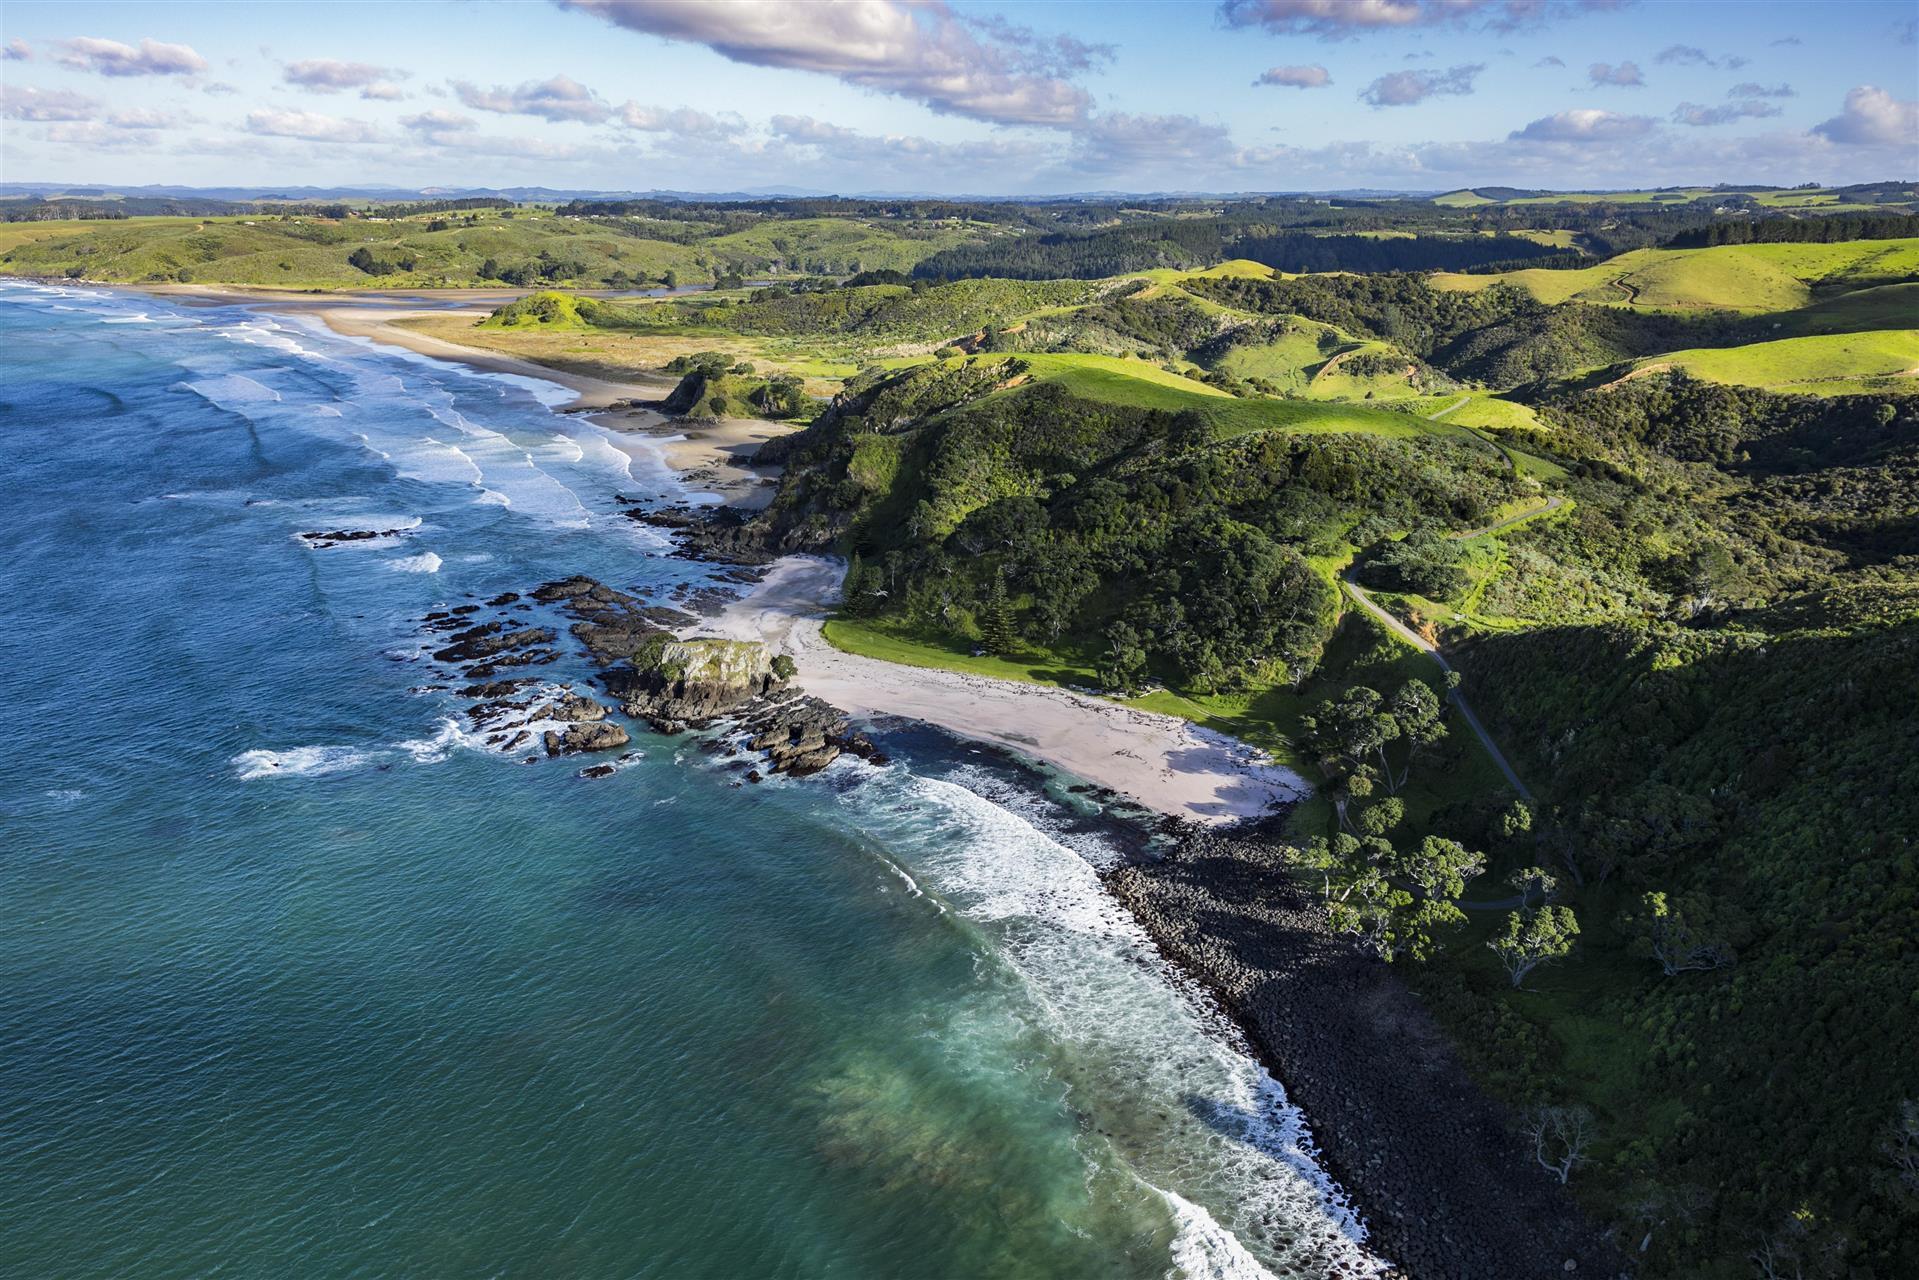 Rosewood Kauri Cliffs (Accepting reservations now for December 1, 2023 onwards) in Kerikeri, NZ